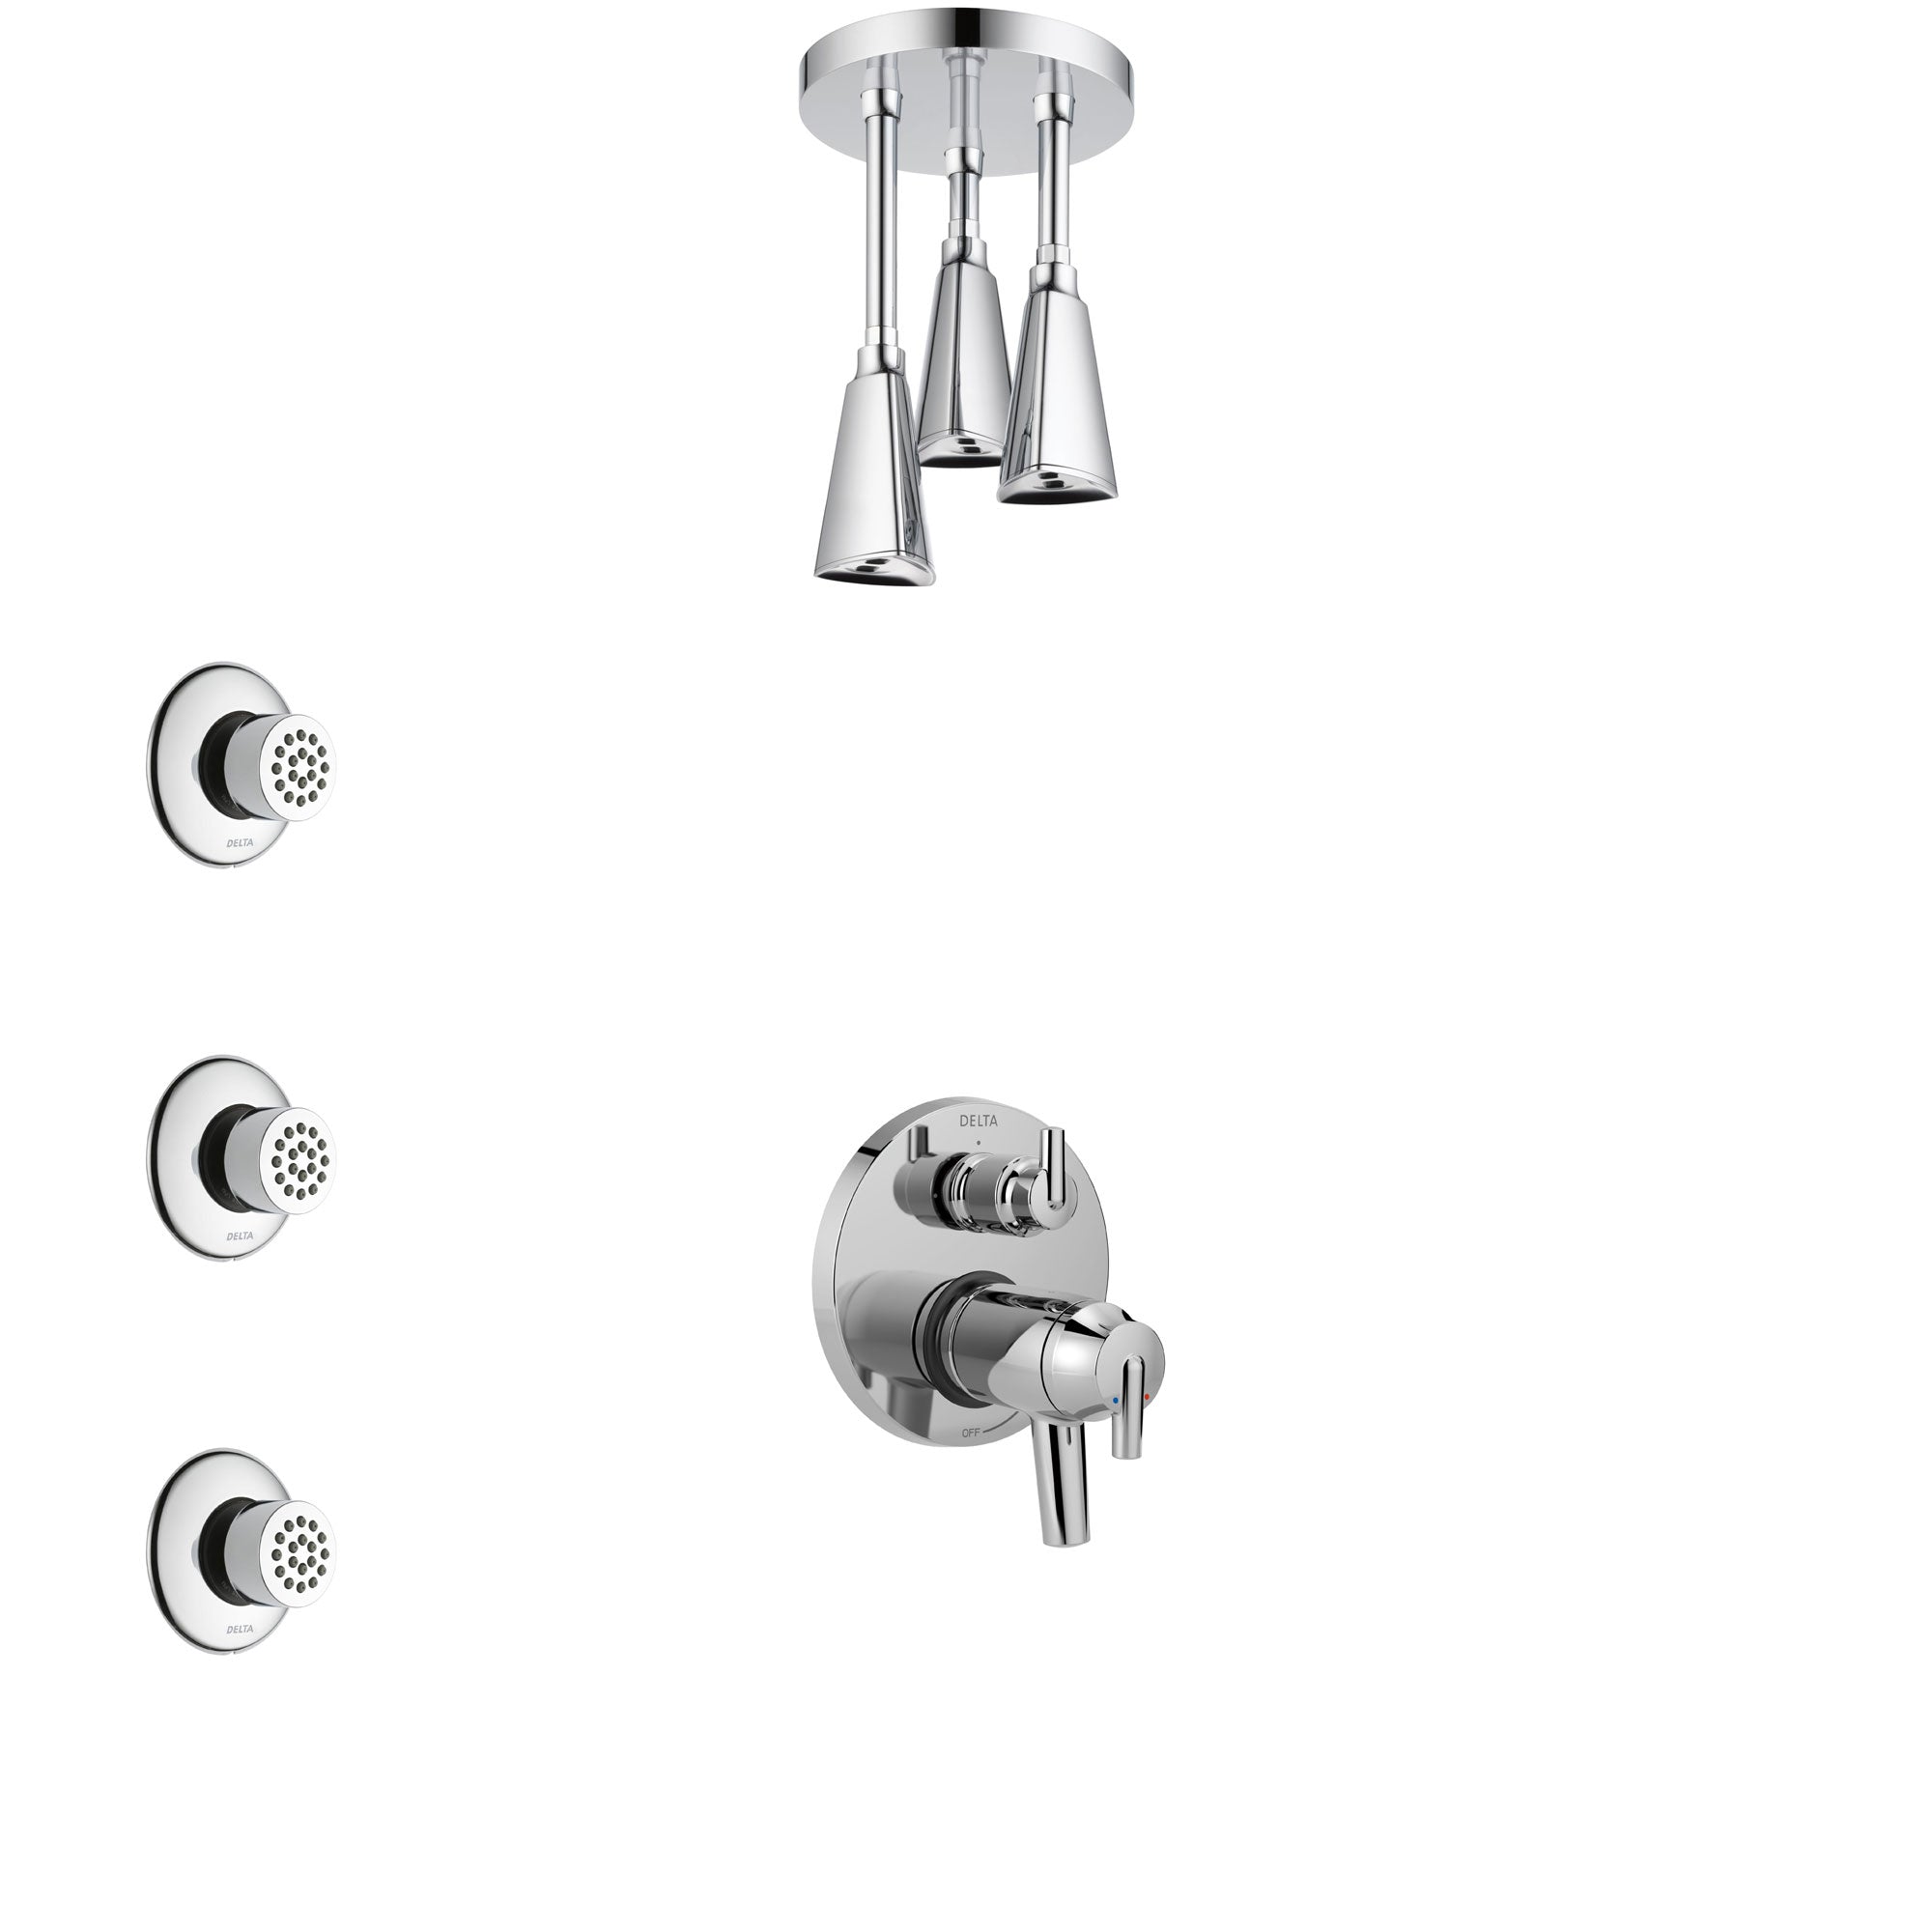 Delta Trinsic Chrome Shower System with Dual Thermostatic Control Handle, Integrated Diverter, Ceiling Mount Showerhead, and 3 Body Sprays SS27T8595